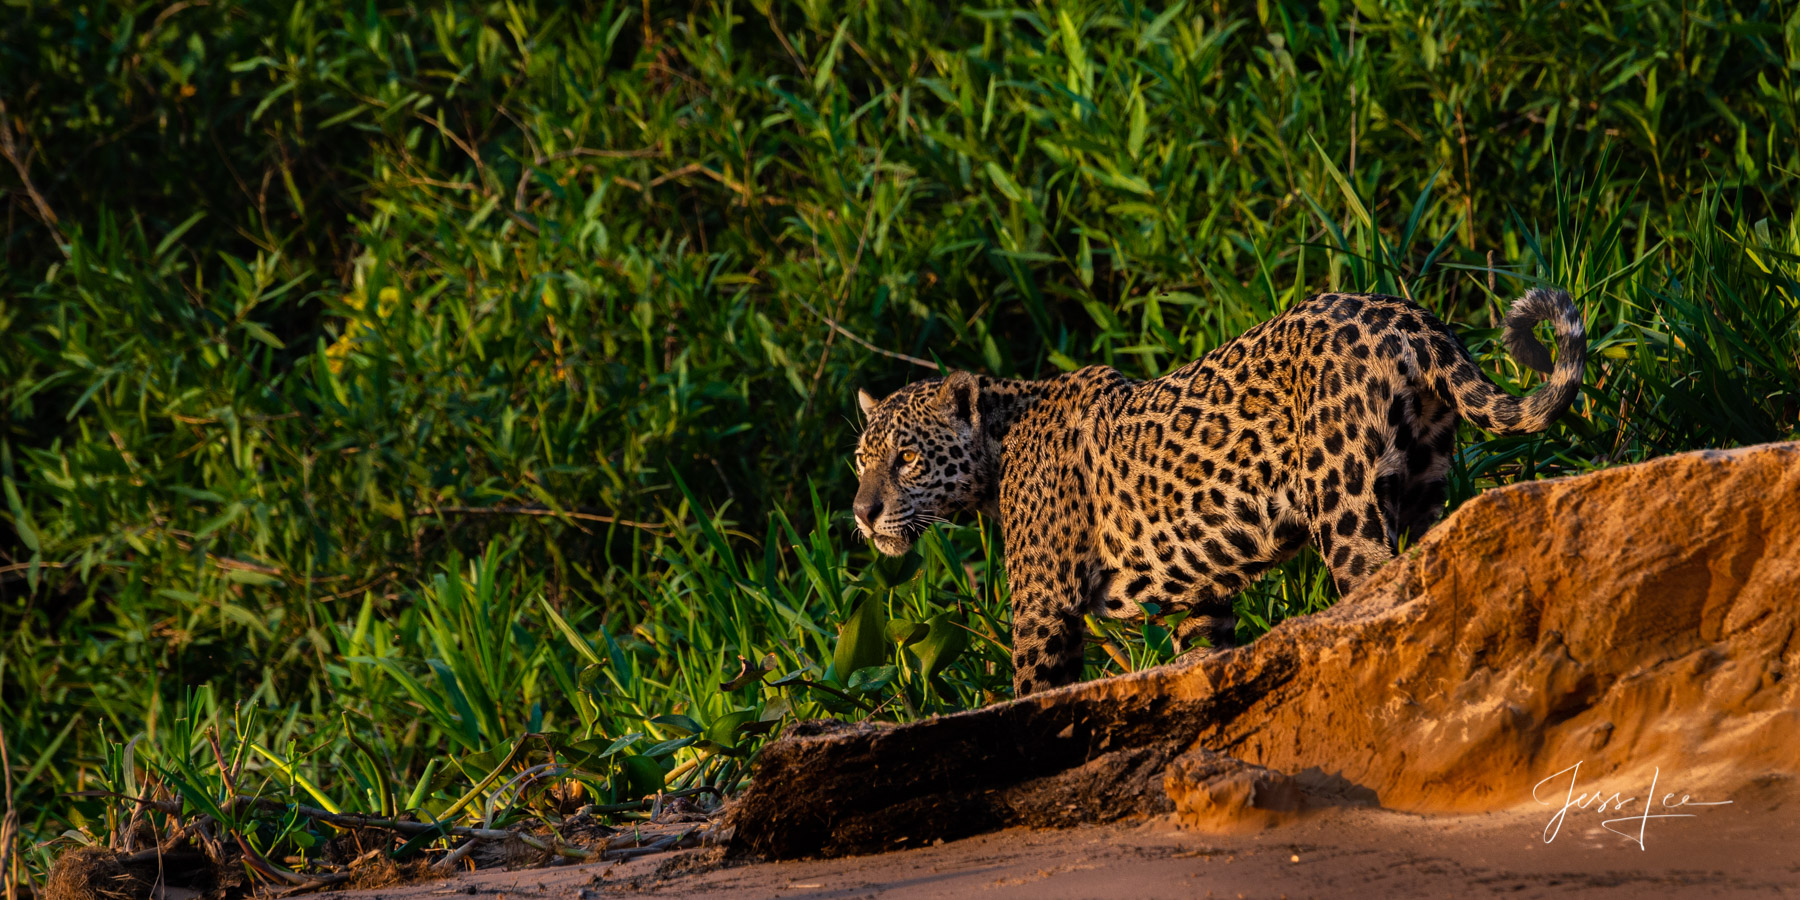 Fine art Jaguar on the river bank  print limited edition of 300 luxury prints by Jess Lee. All photographs copyright © Jess...